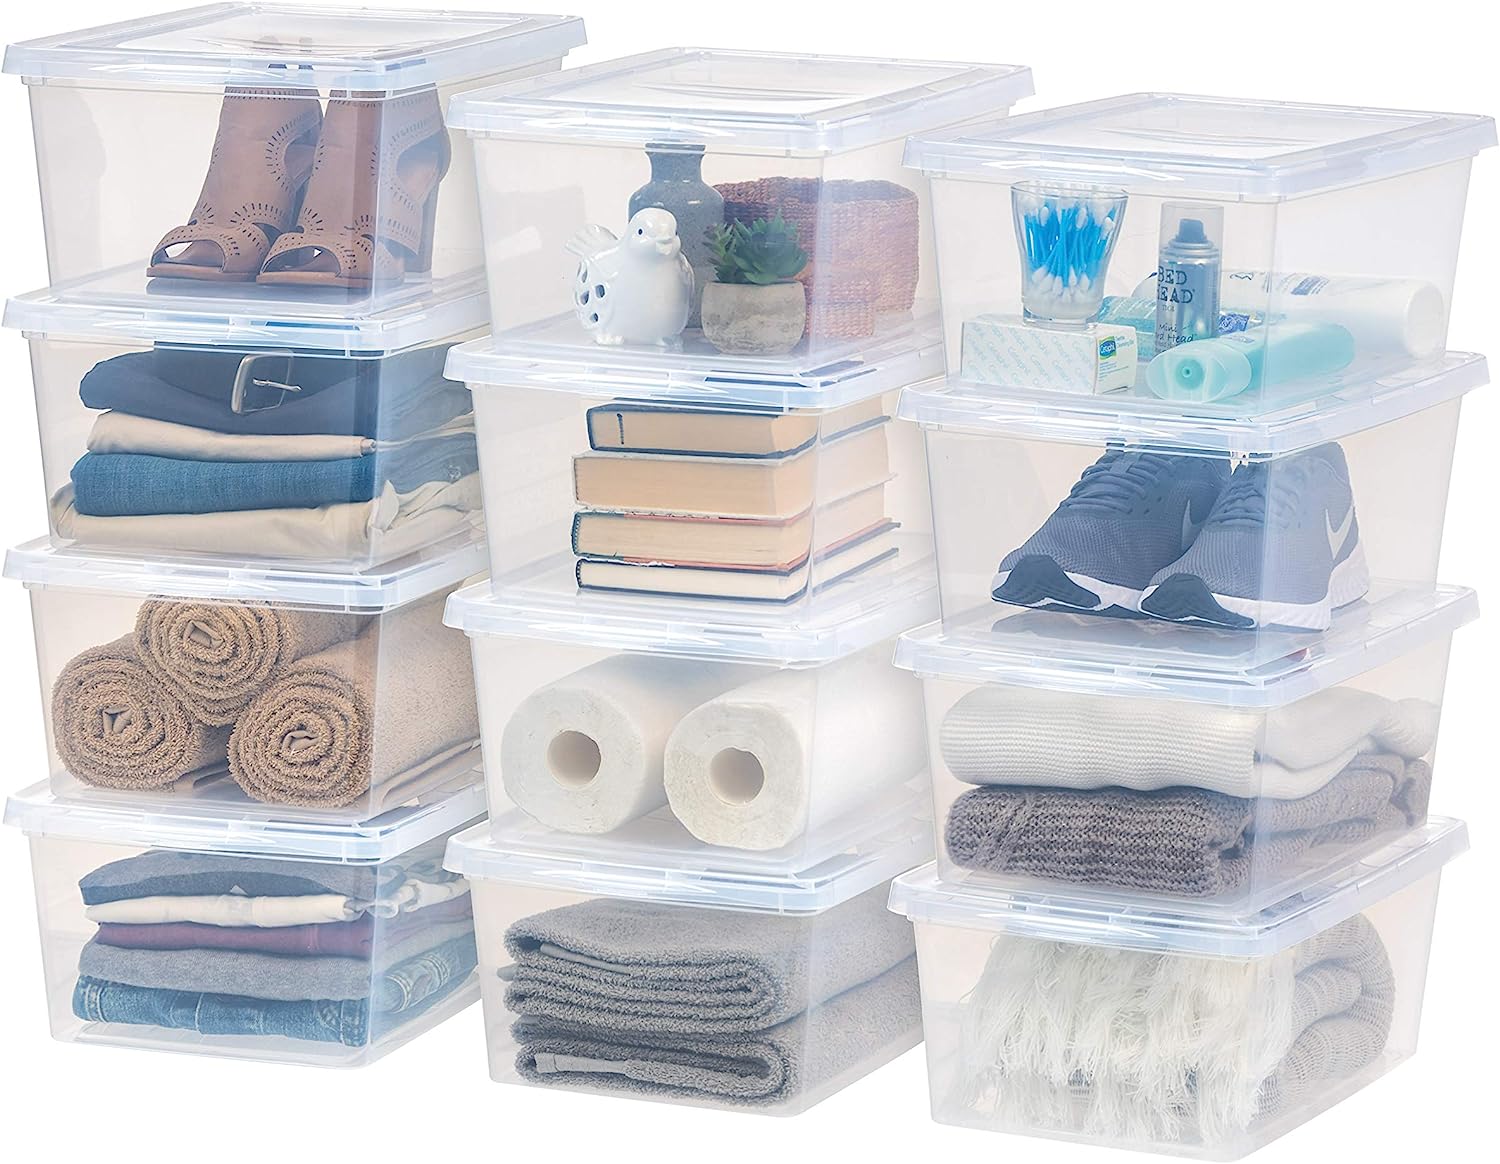 https://bigbigmart.com/wp-content/uploads/2023/06/IRIS-USA-17.5-Qt-Plastic-Storage-Container-Bin-with-Latching-Lid-Stackable-Nestable-Box-Tote-Closet-Organization-School-Art-Supplies-Clear-12-Pack.jpg